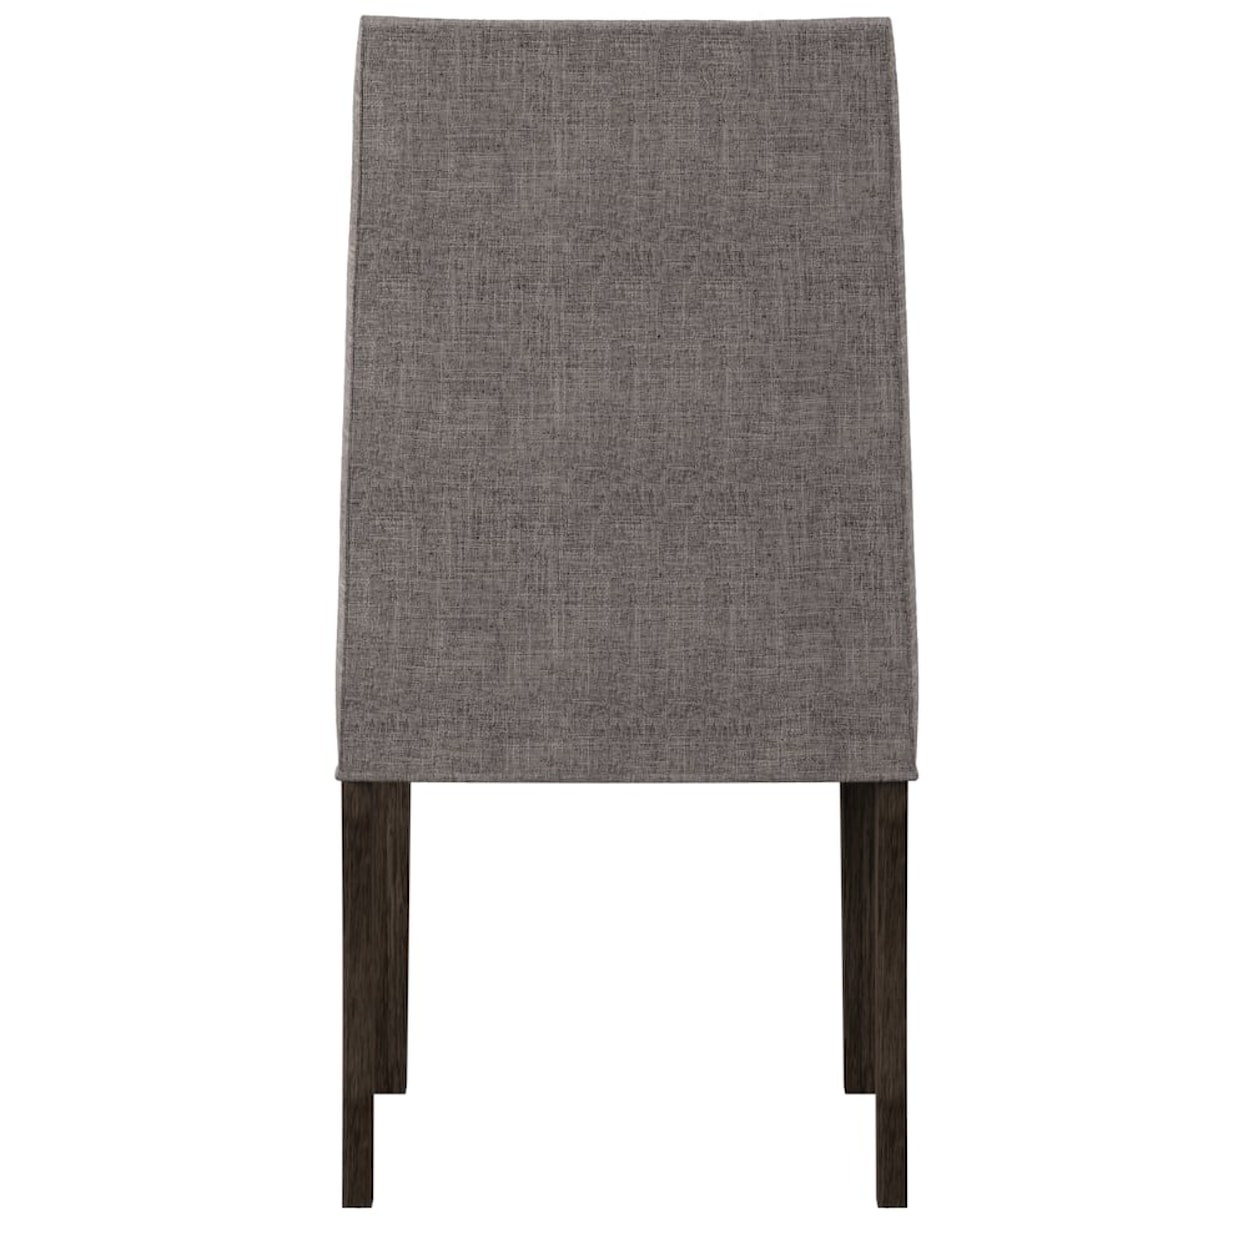 Libby Double Bridge Upholstered Dining Side Chair